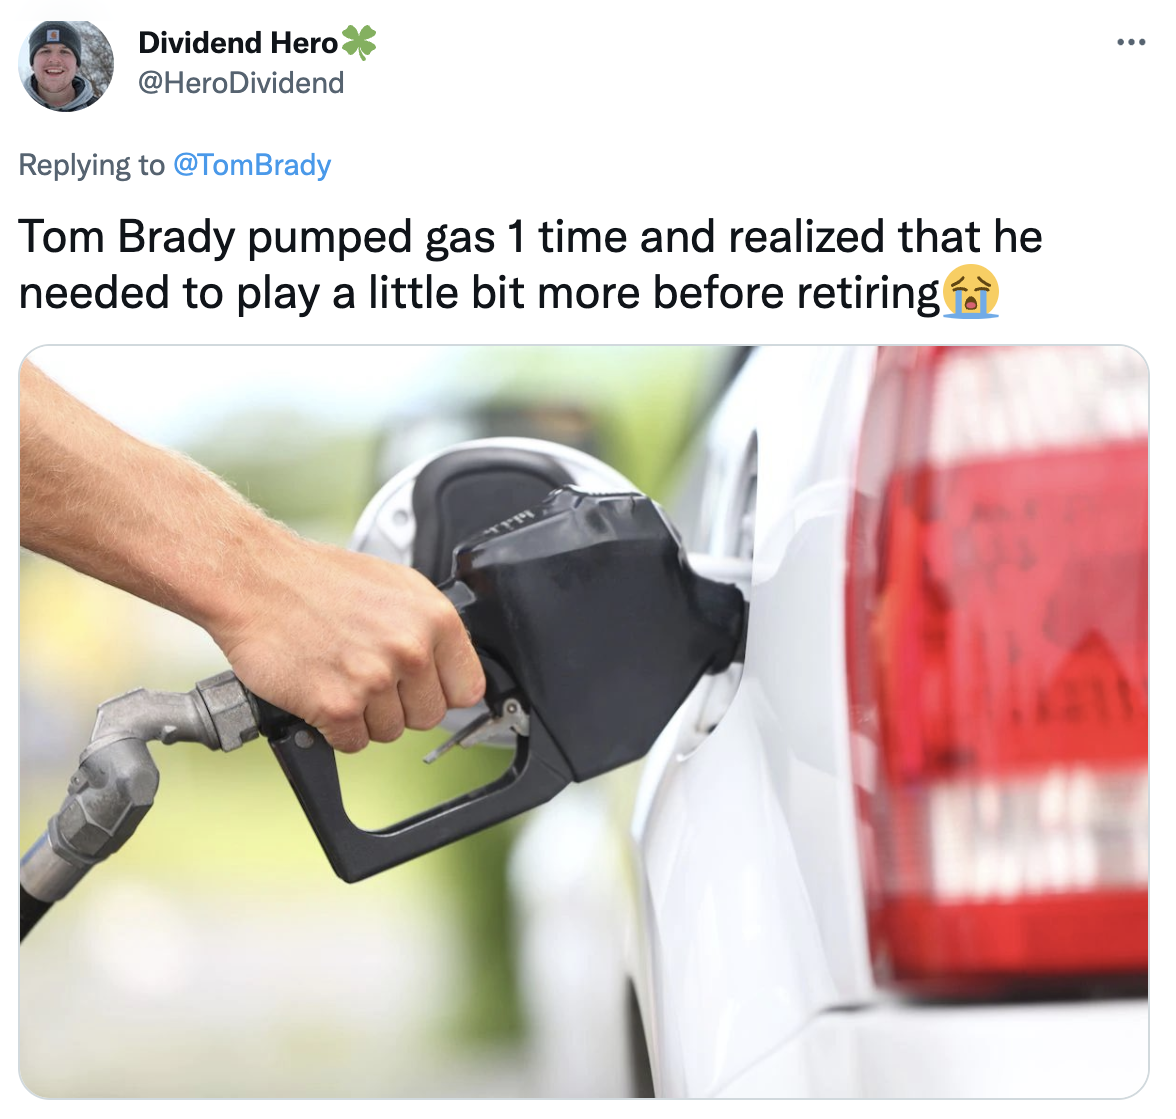 Tom Brady un-retirement memesfuel saving - Dividend Hero Dividend Tom Brady pumped gas 1 time and realized that he needed to play a little bit more before retiring